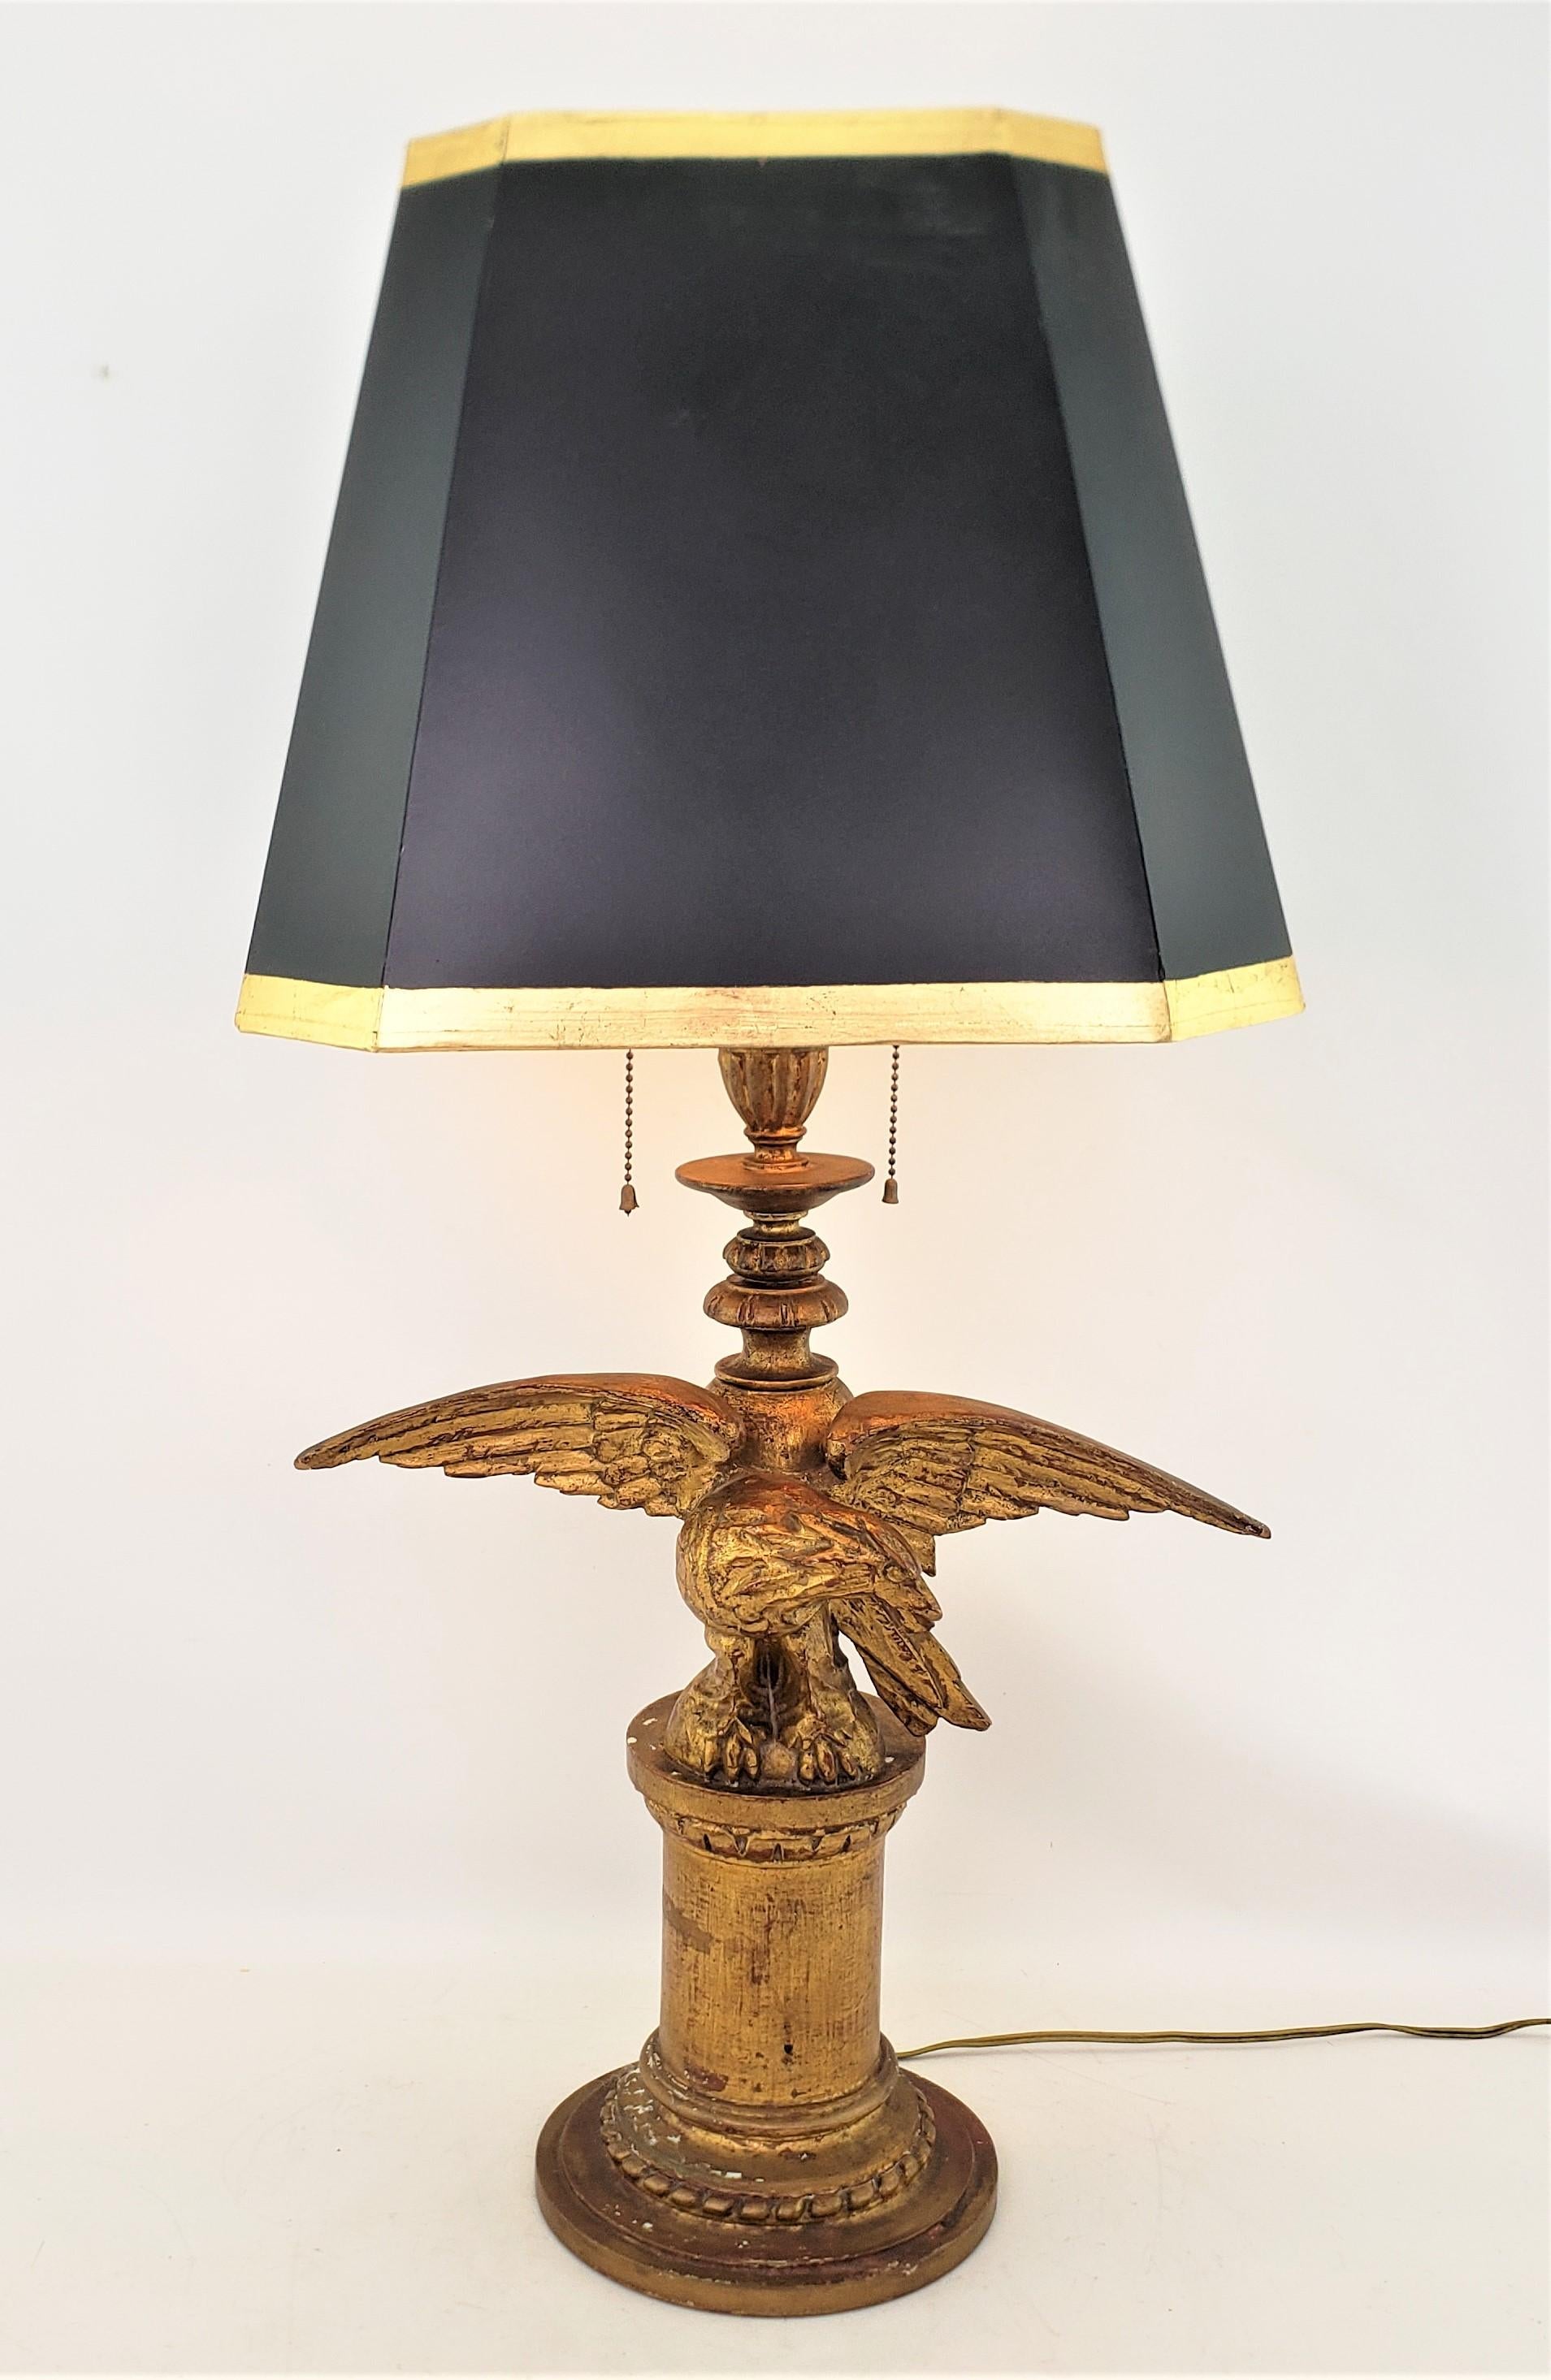 This antique well executed carved eagle table lamp is unsigned, but presumed to have originated from the United States and date to approximately 1920 and done in a Federalist style. The body of the lamp is done in a carved softwood, sealed with a